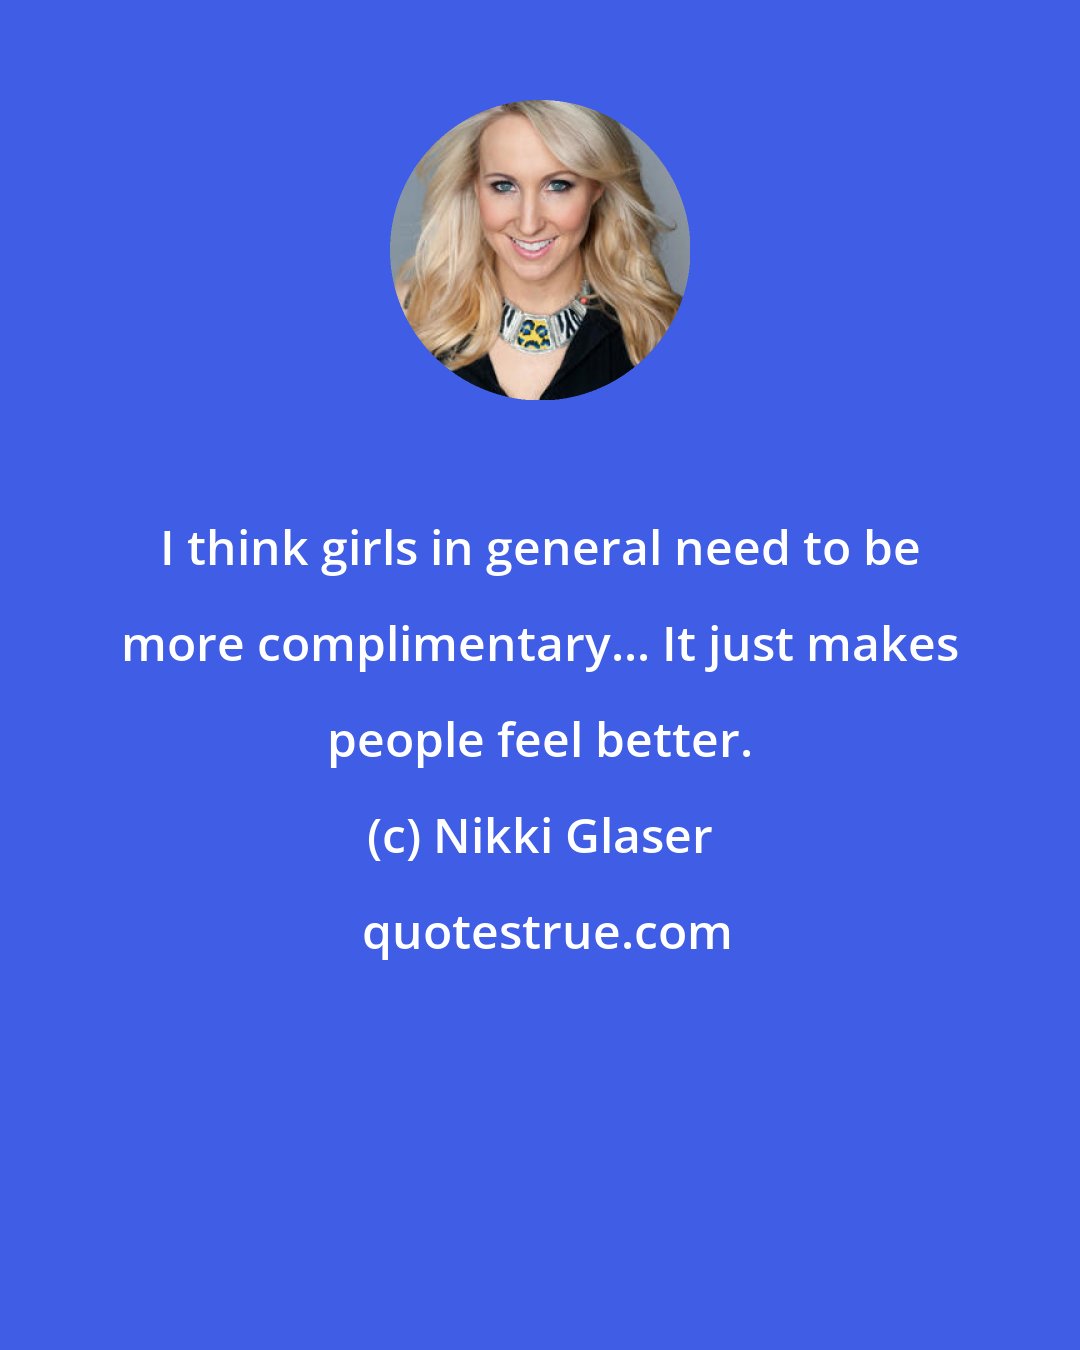 Nikki Glaser: I think girls in general need to be more complimentary... It just makes people feel better.